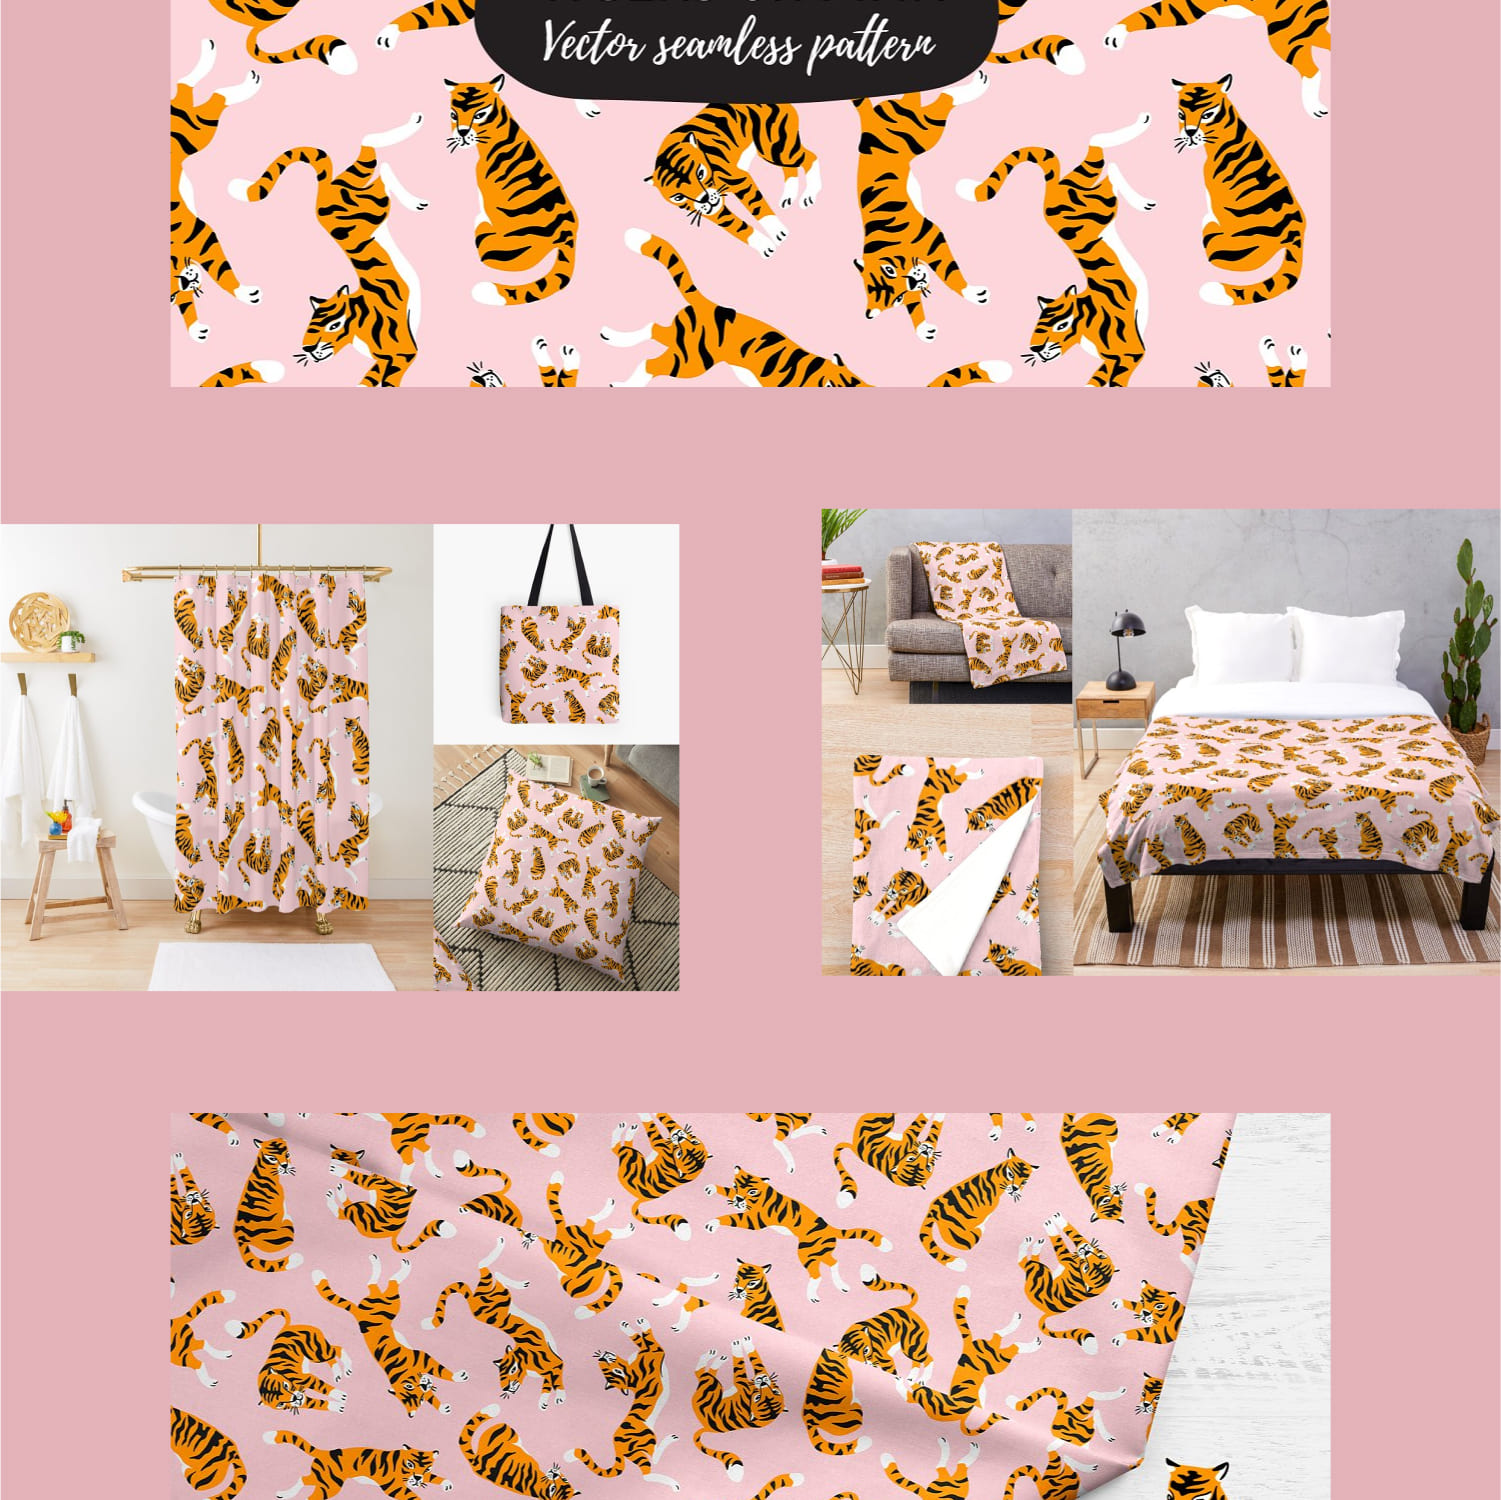 Cute tigers on pink seamless pattern cover.